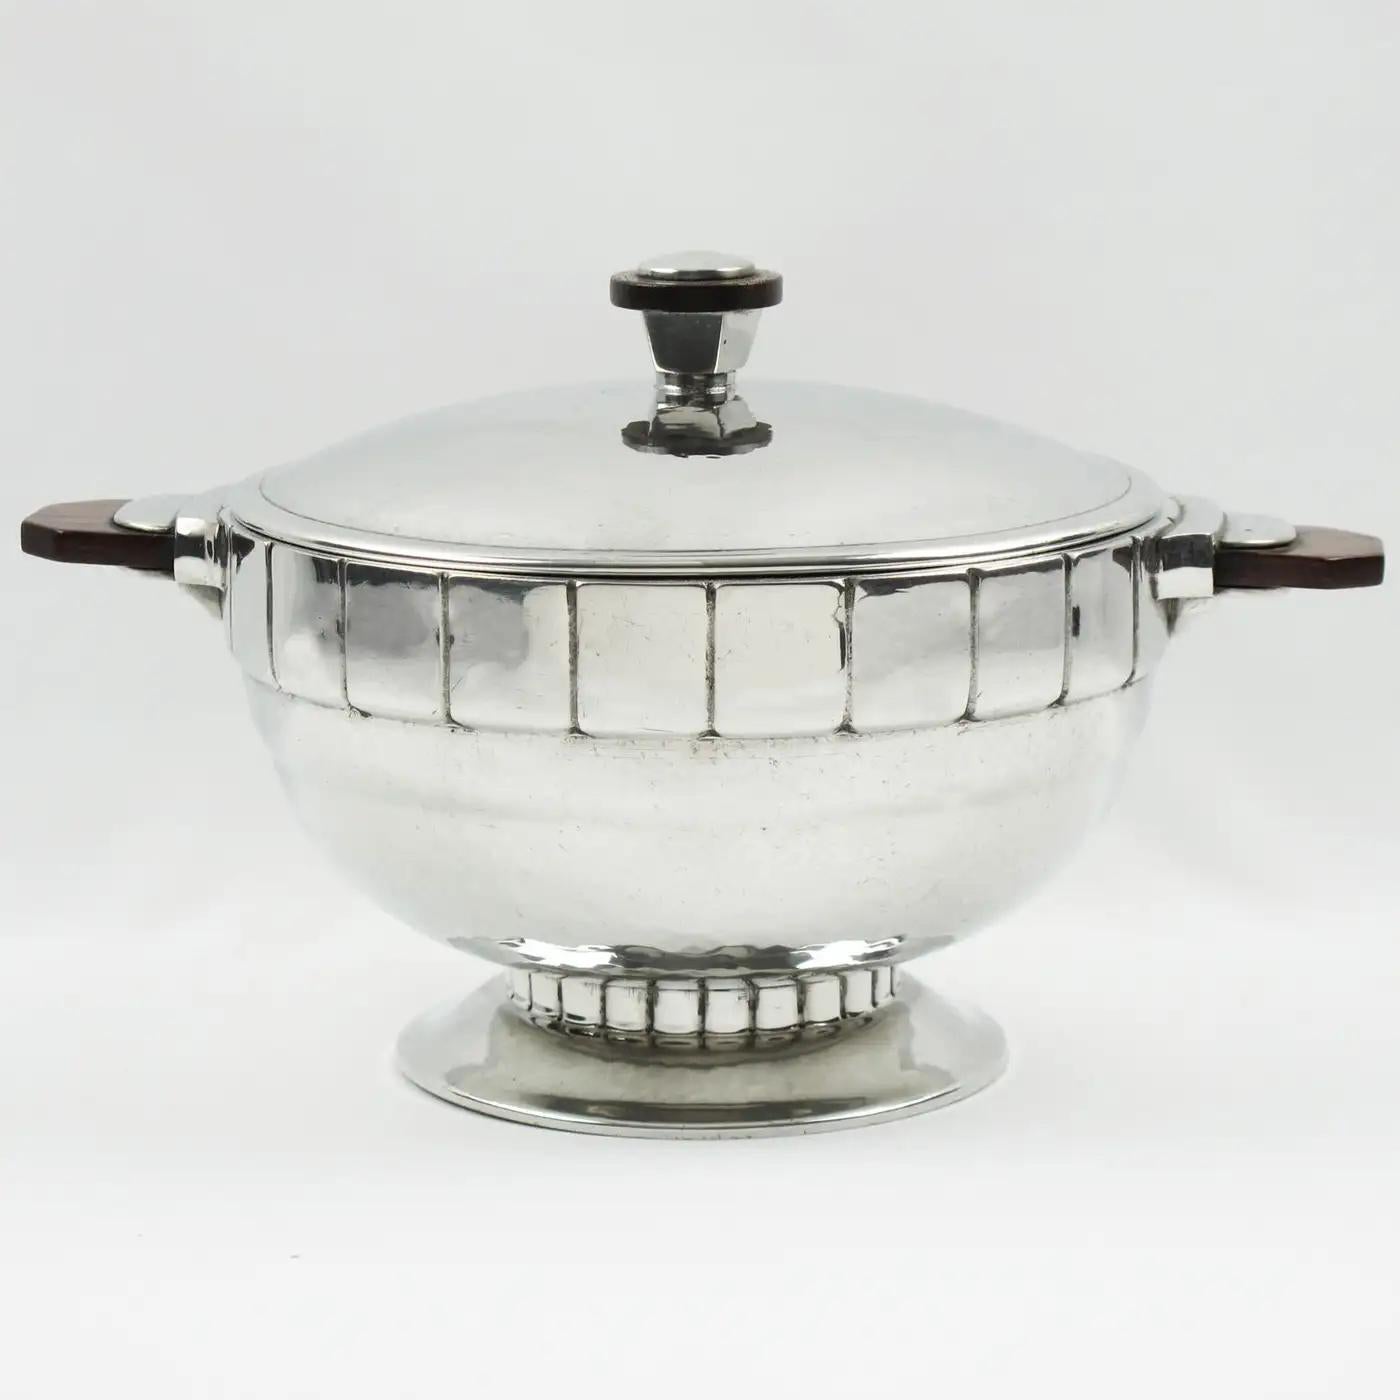 H. J. Swiss Pewter designed this stunning Art Deco embossed polished pewter centerpiece or covered dish in the 1940s. The soup tureen features an elegant modernist shape in polished pewter with a detailed embossed design and solid wood handles. The